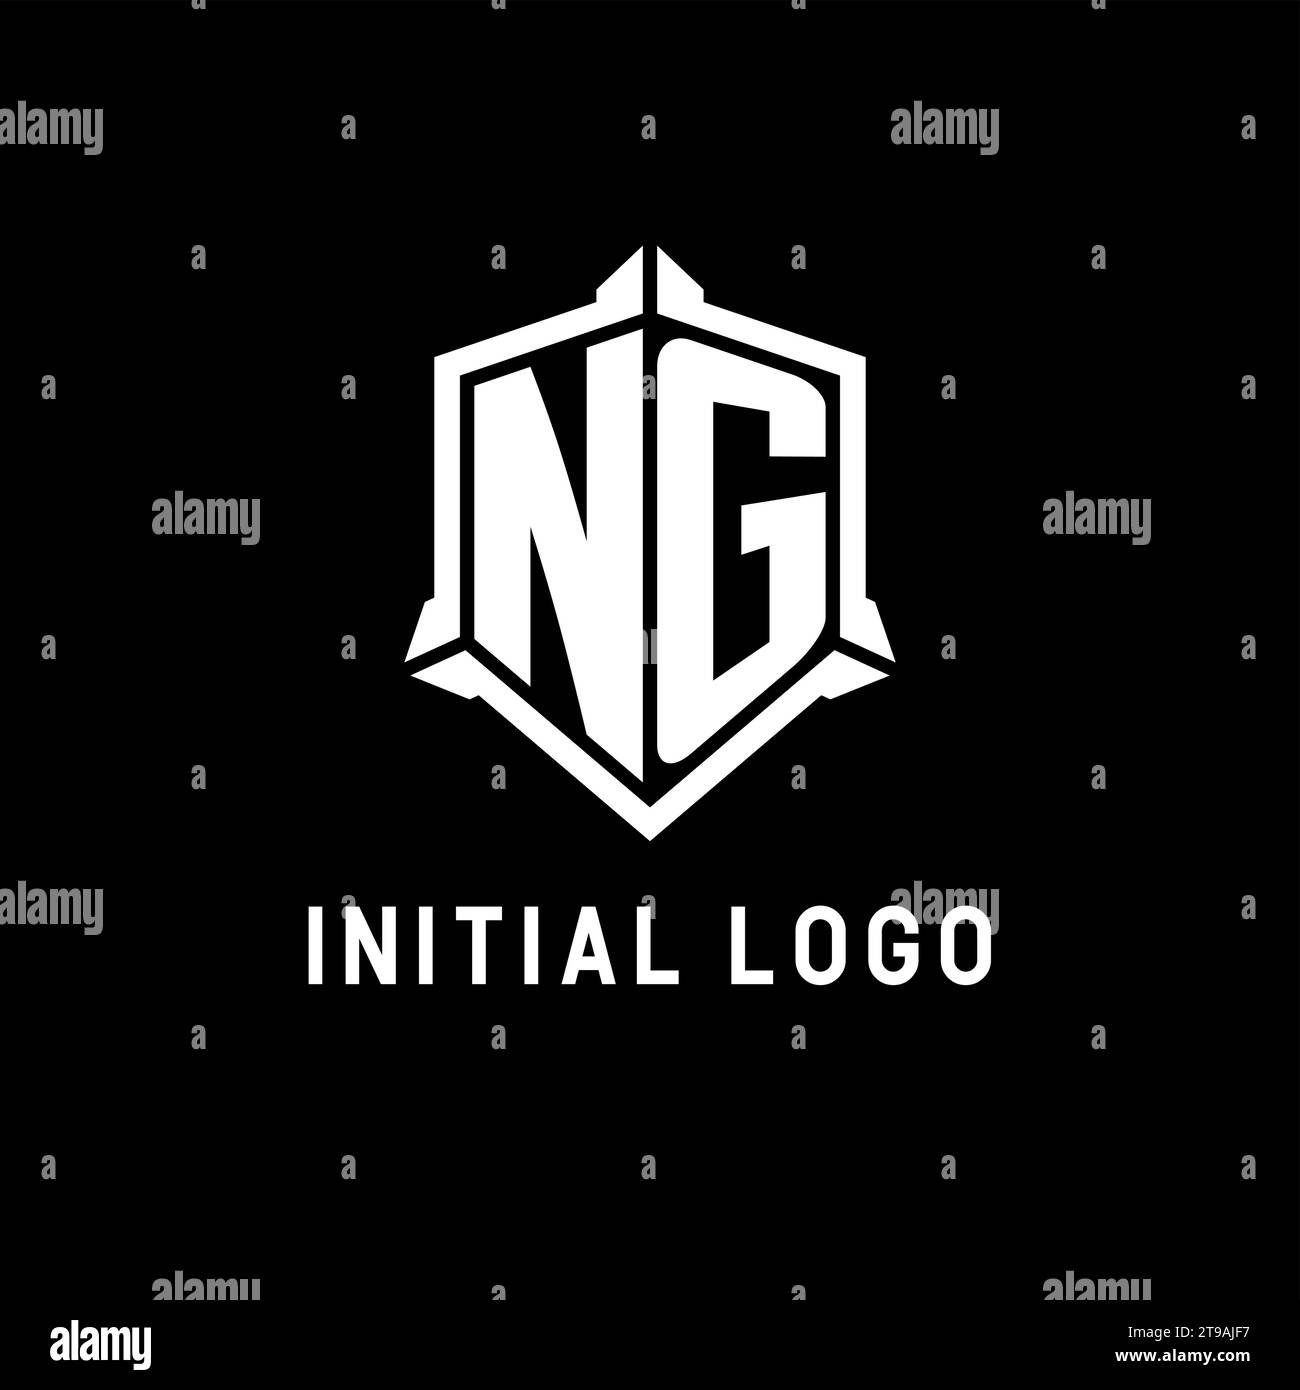 NG logo initial with shield shape design style vector graphic Stock Vector